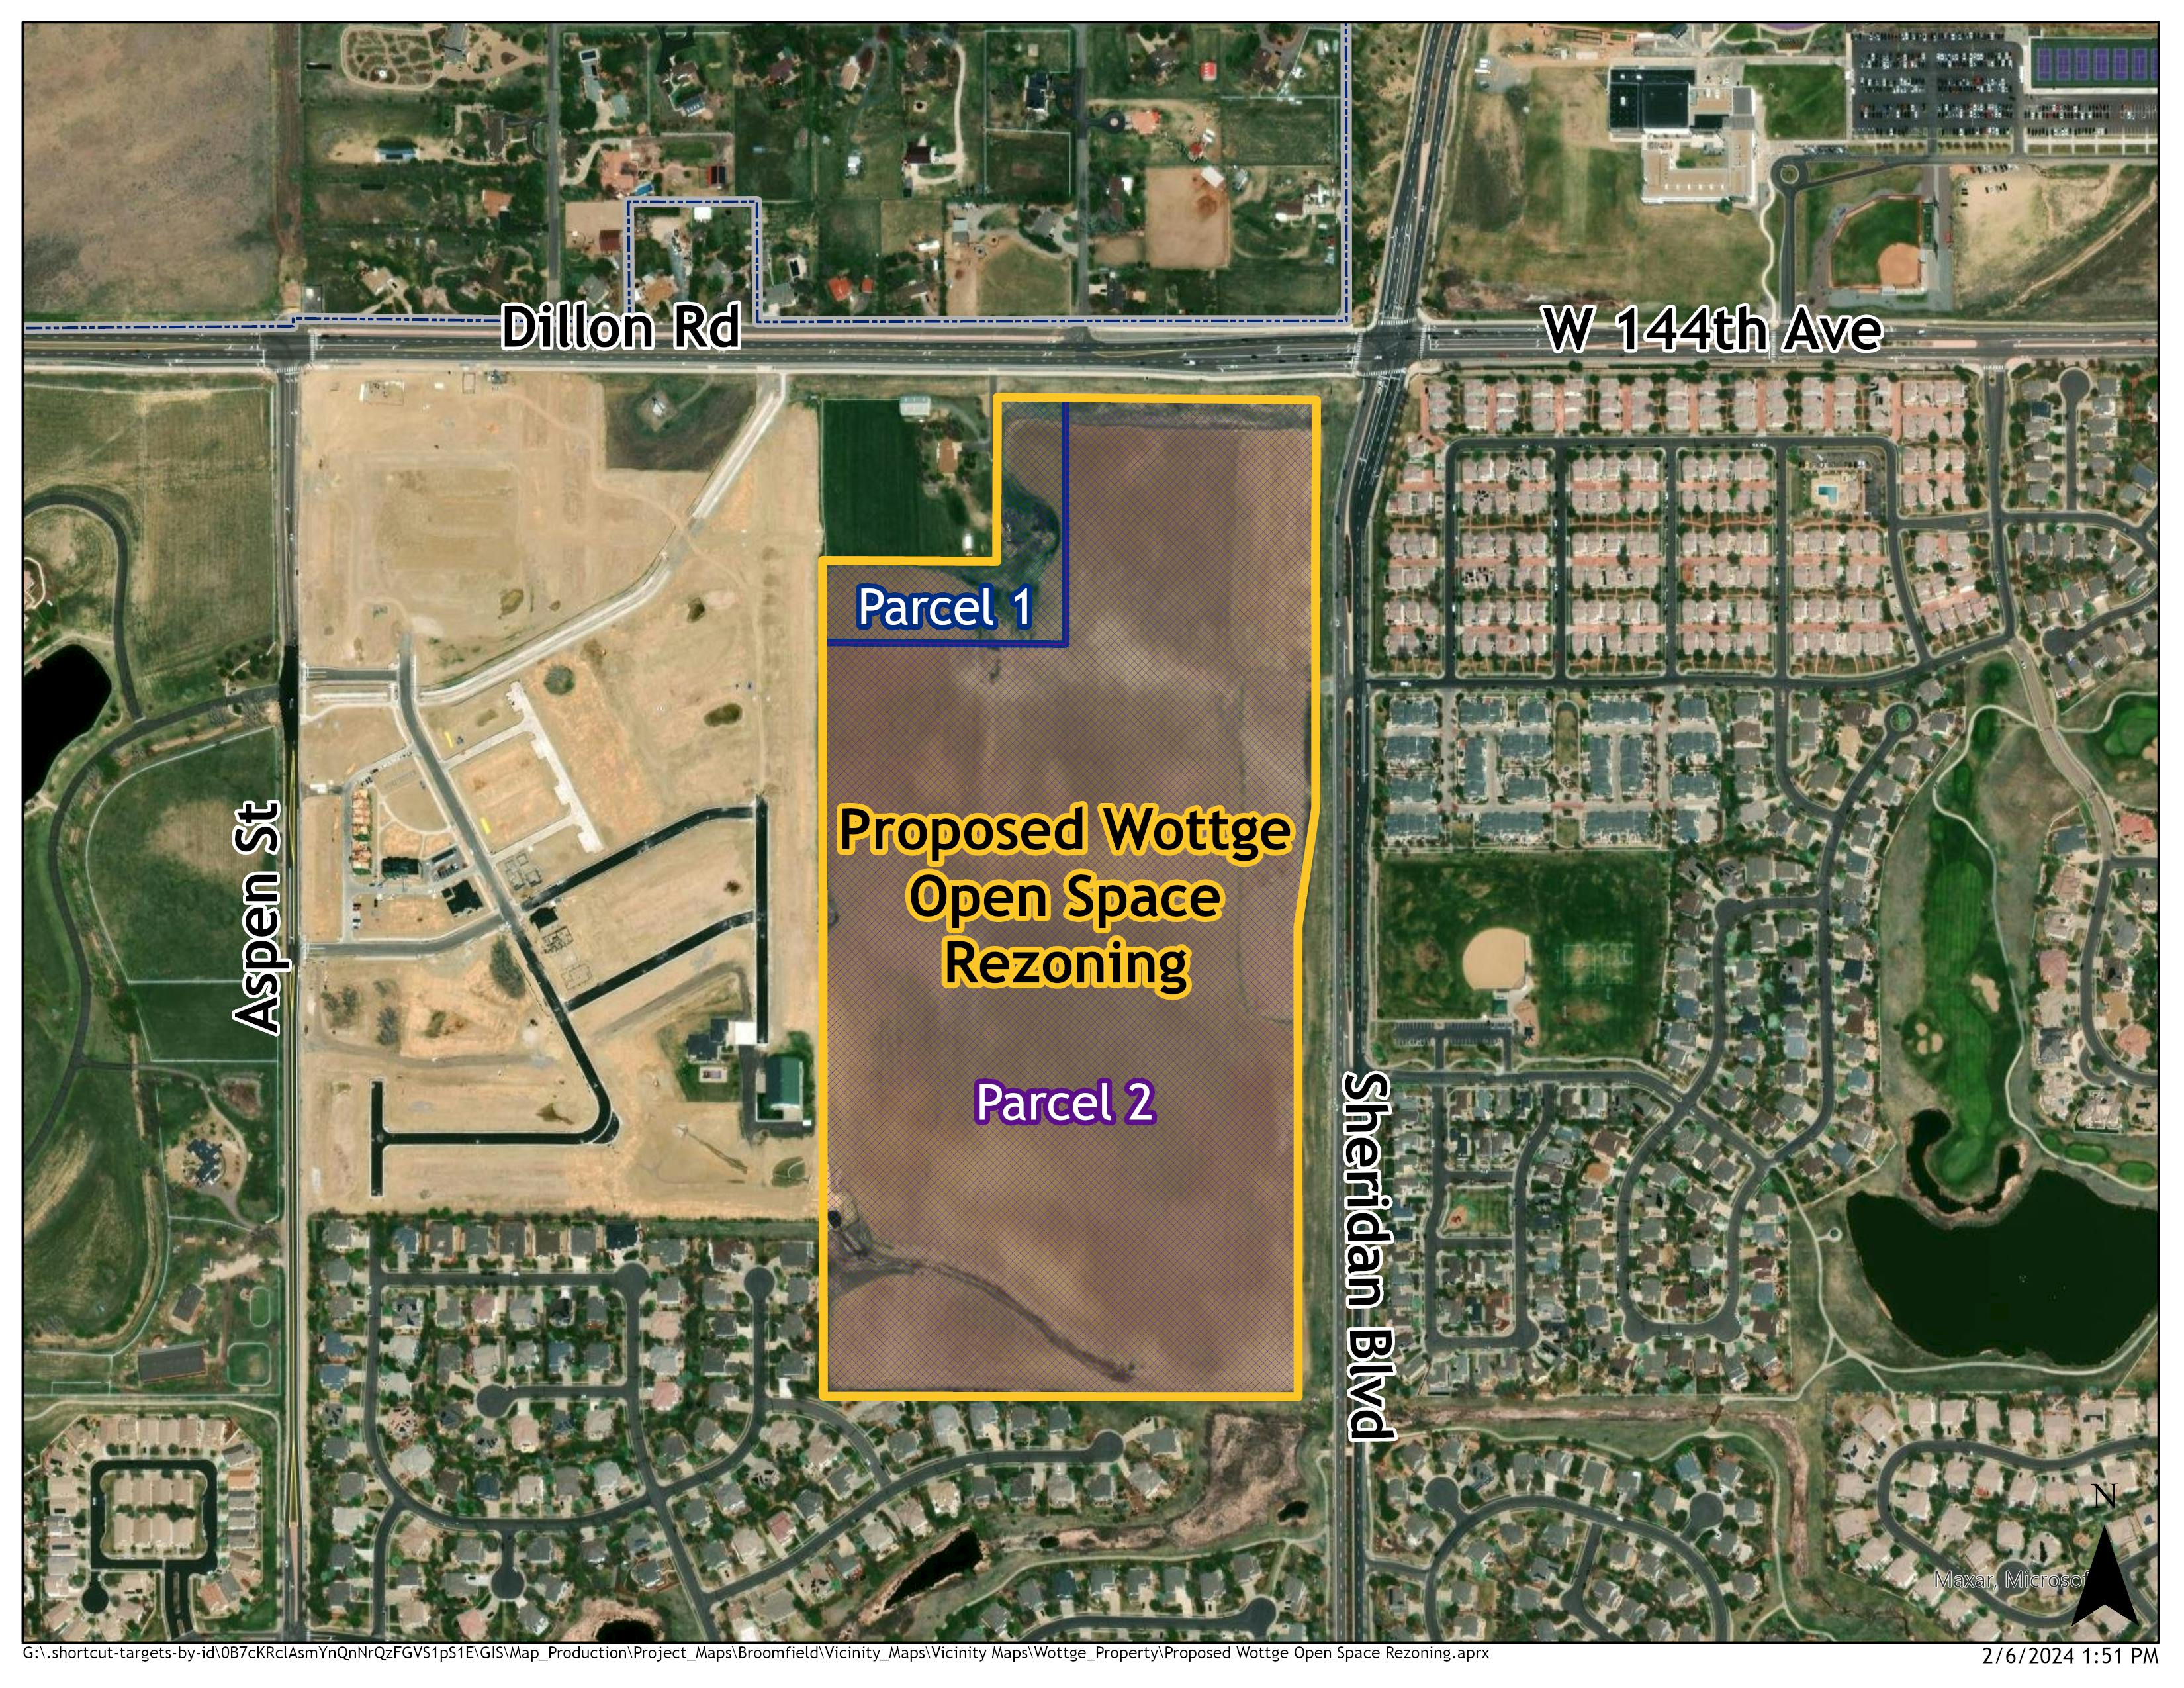 Aerial Map of the Proposed Wottge Open Space Rezoning